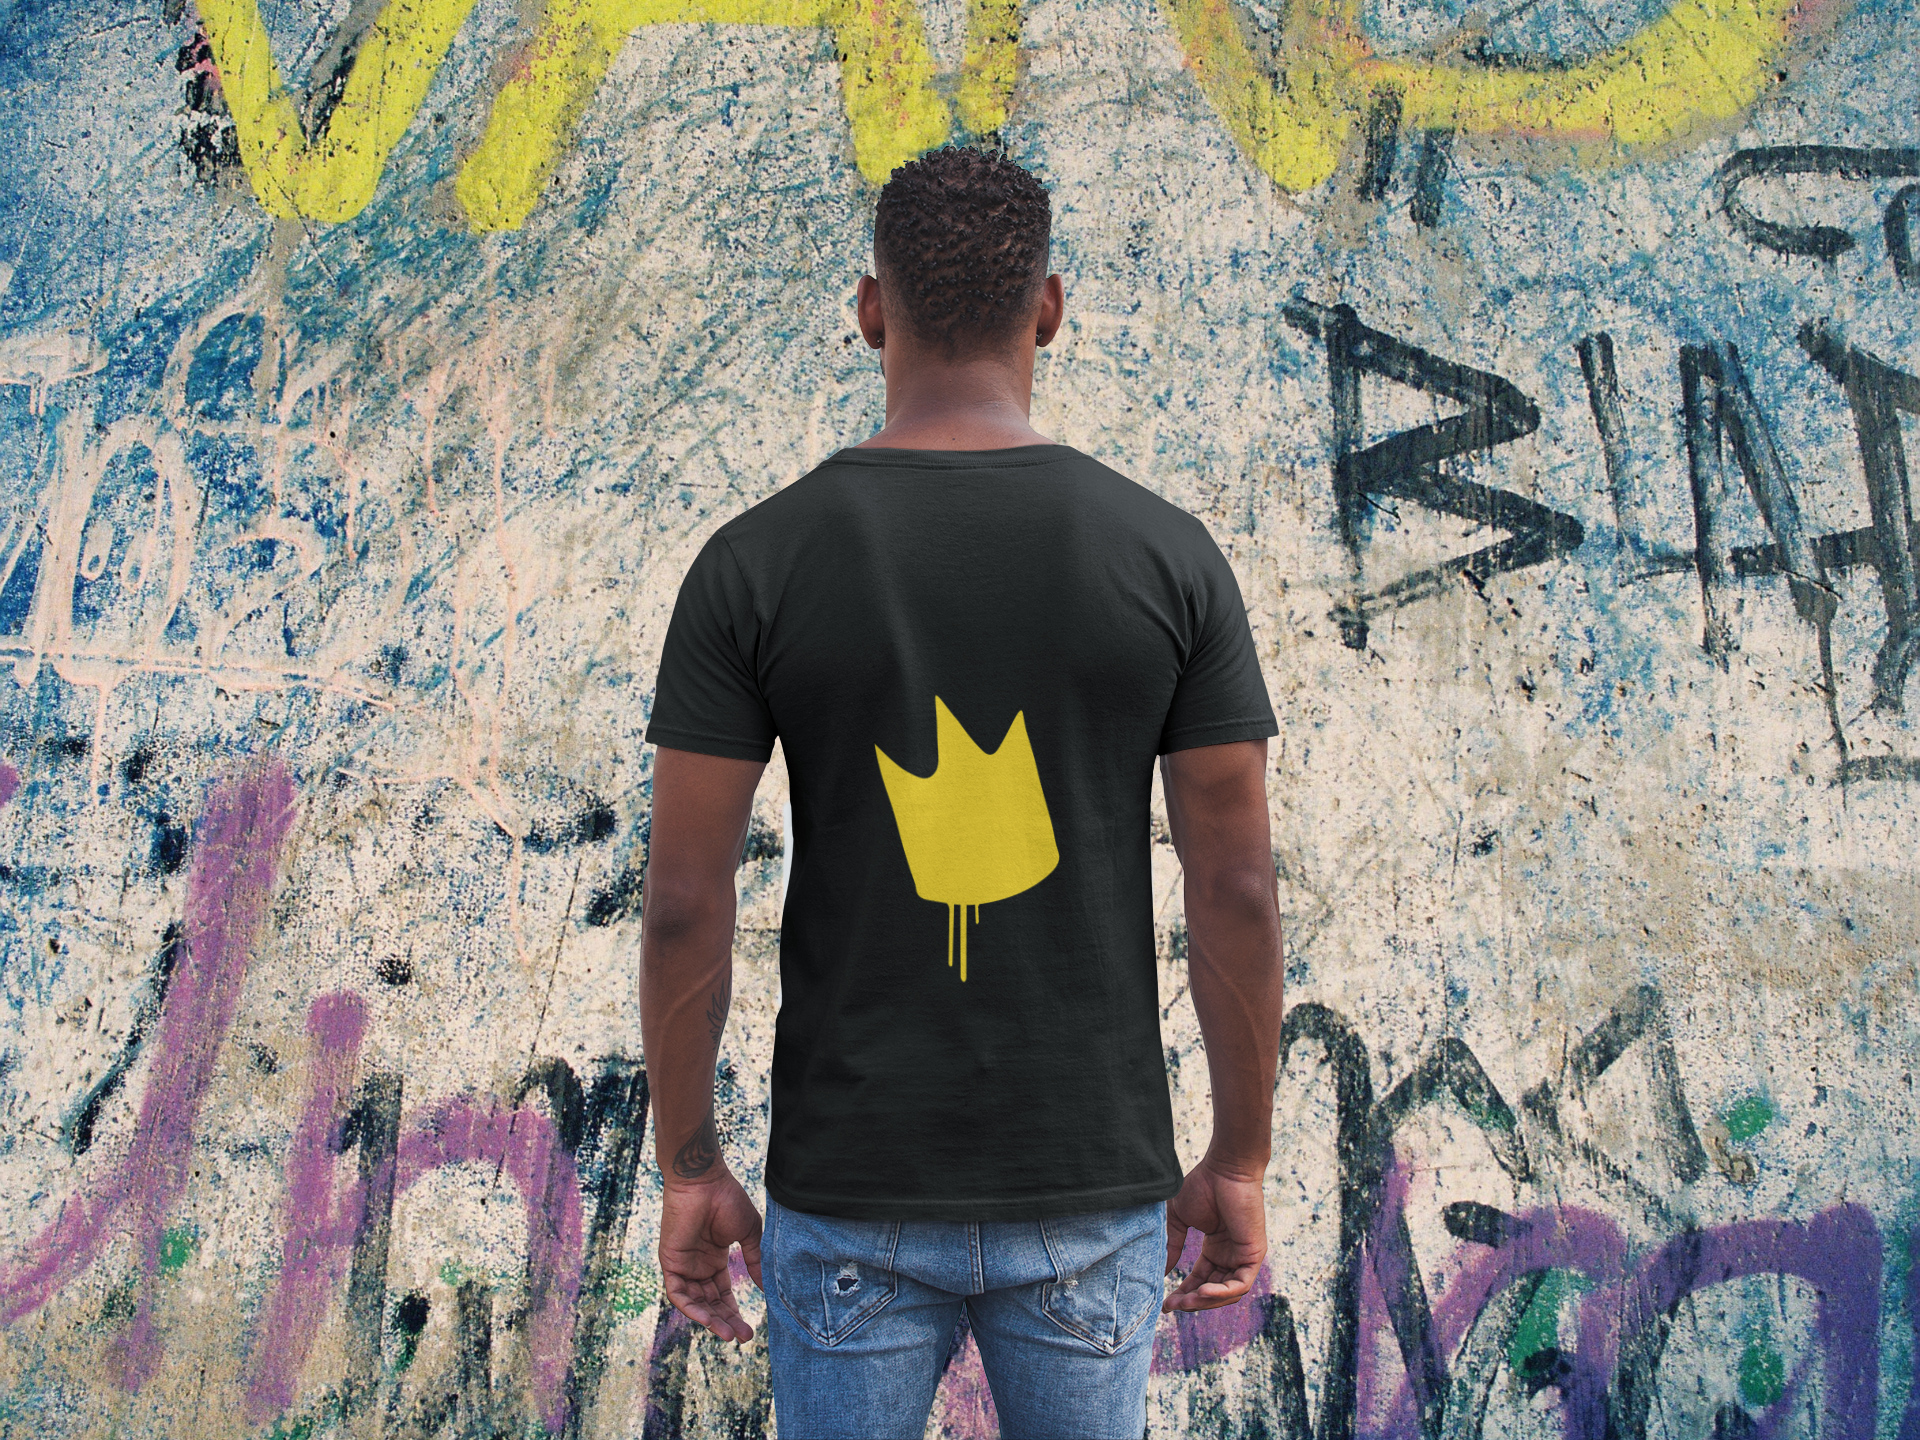 VVS Crown Tee (Black T Shirt with Yellow Crown)